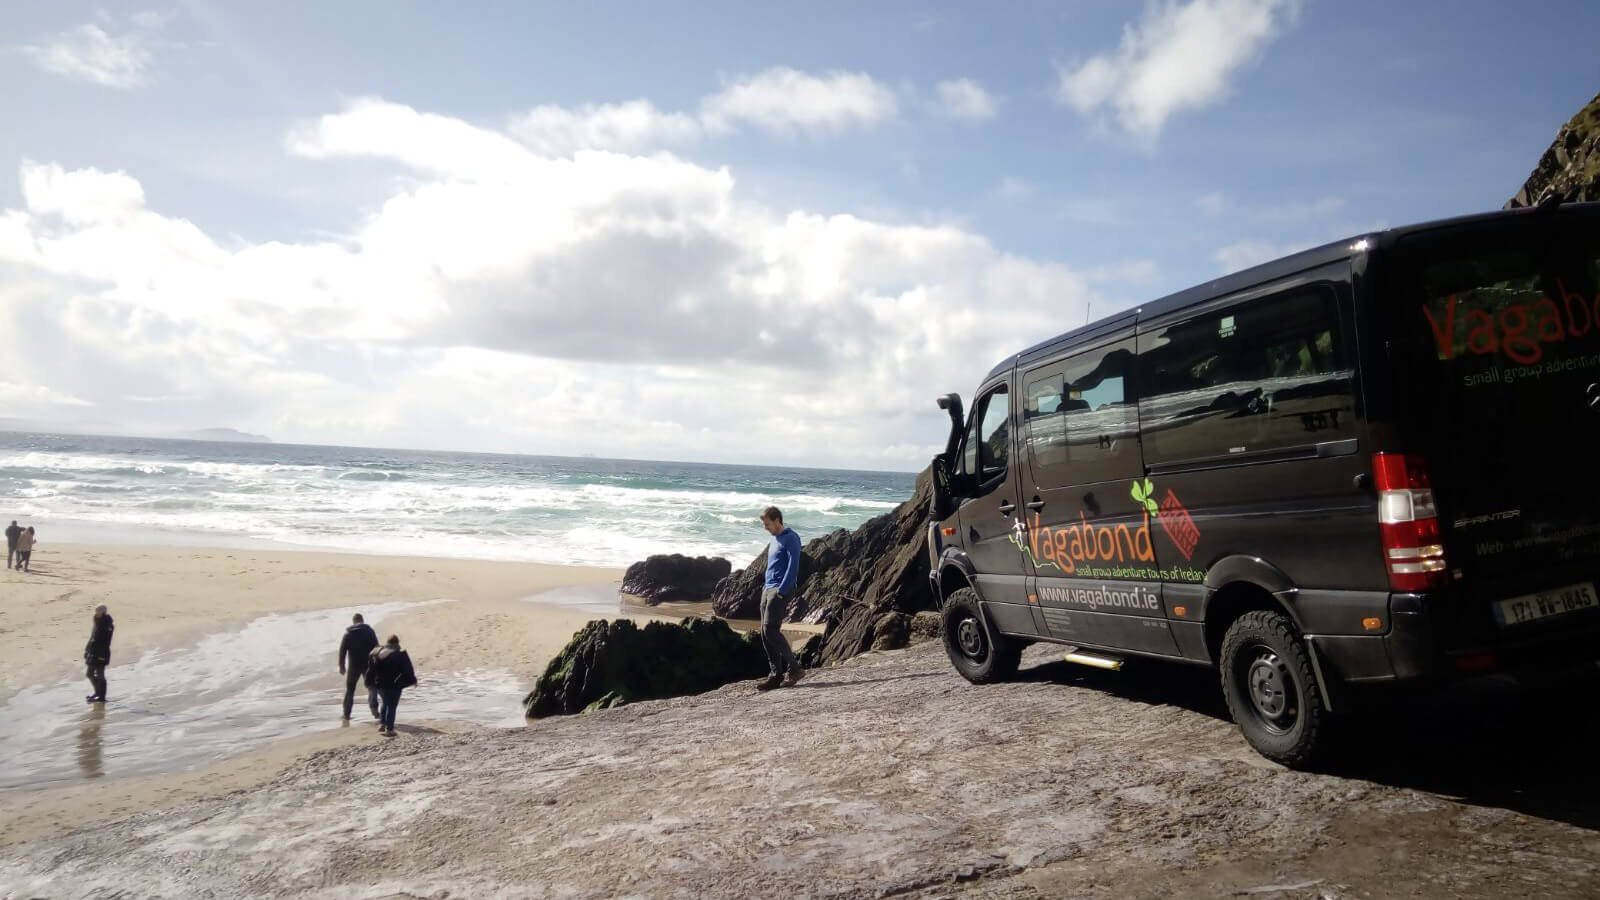 A Vagatron tour vehicle drives onto a beach in Ireland with guests in the background